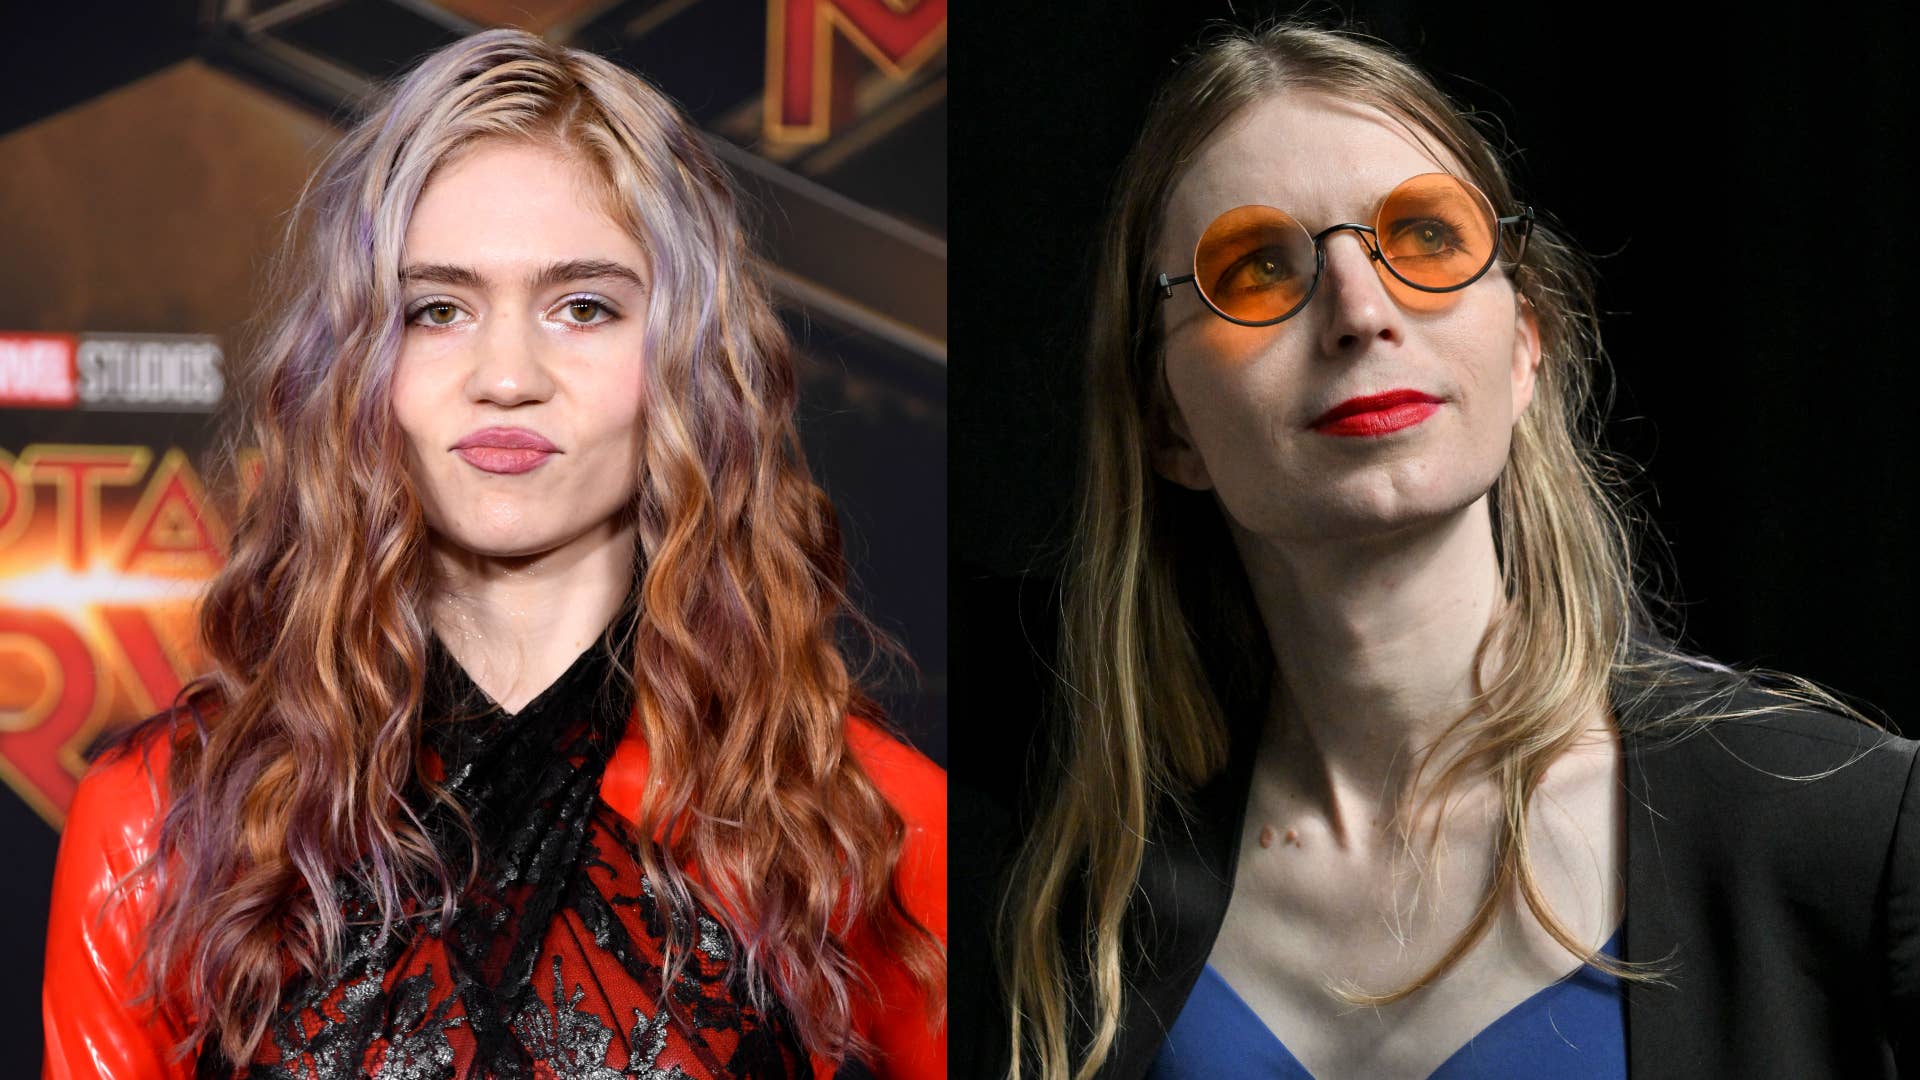 Grimes and Chelsea Manning are pictured